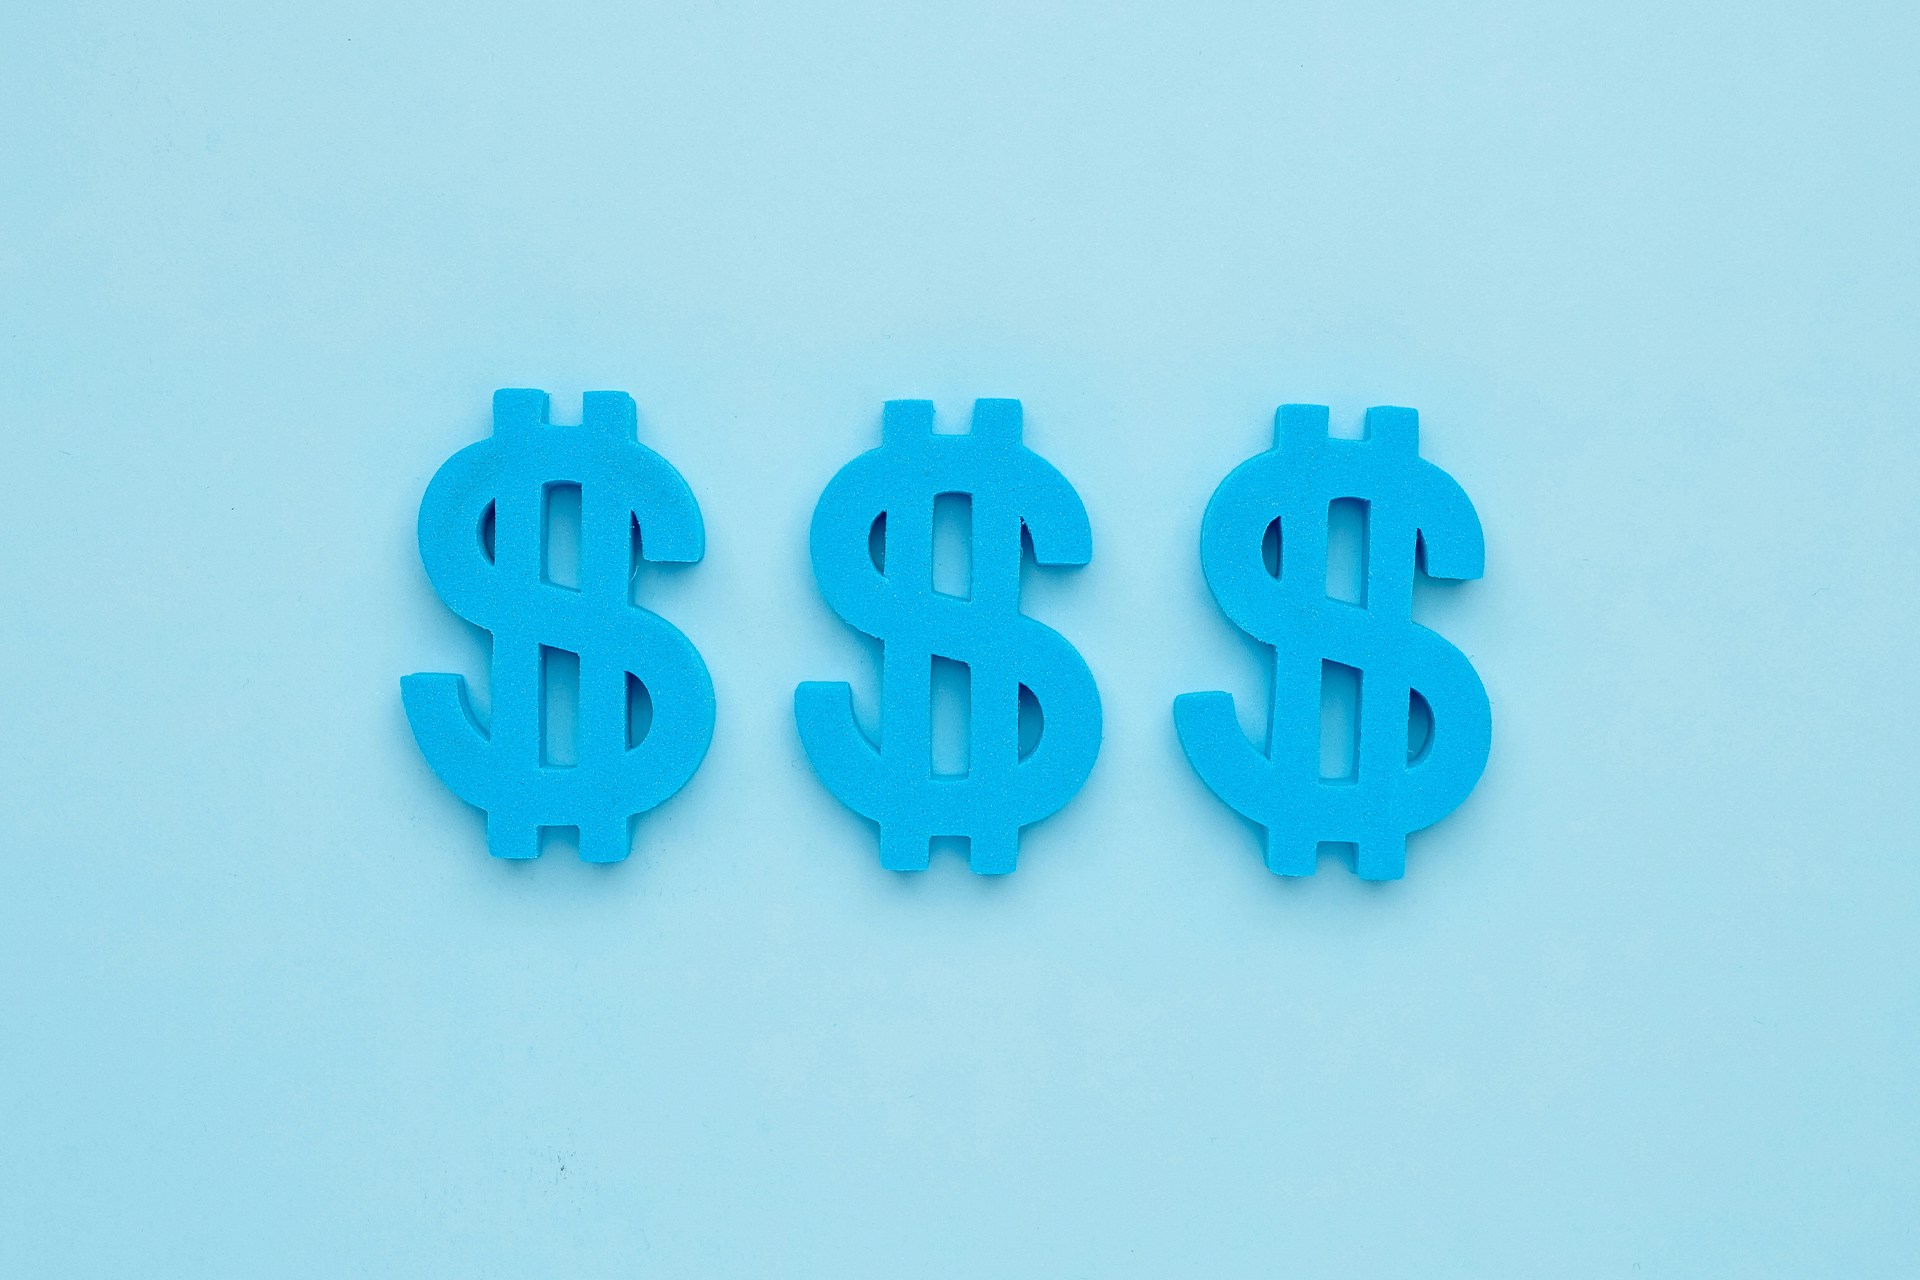 Three blue American dollar signs against a blue background. The dollar signs represent the revenue your marketing team could generate through Facebook lead ads. 